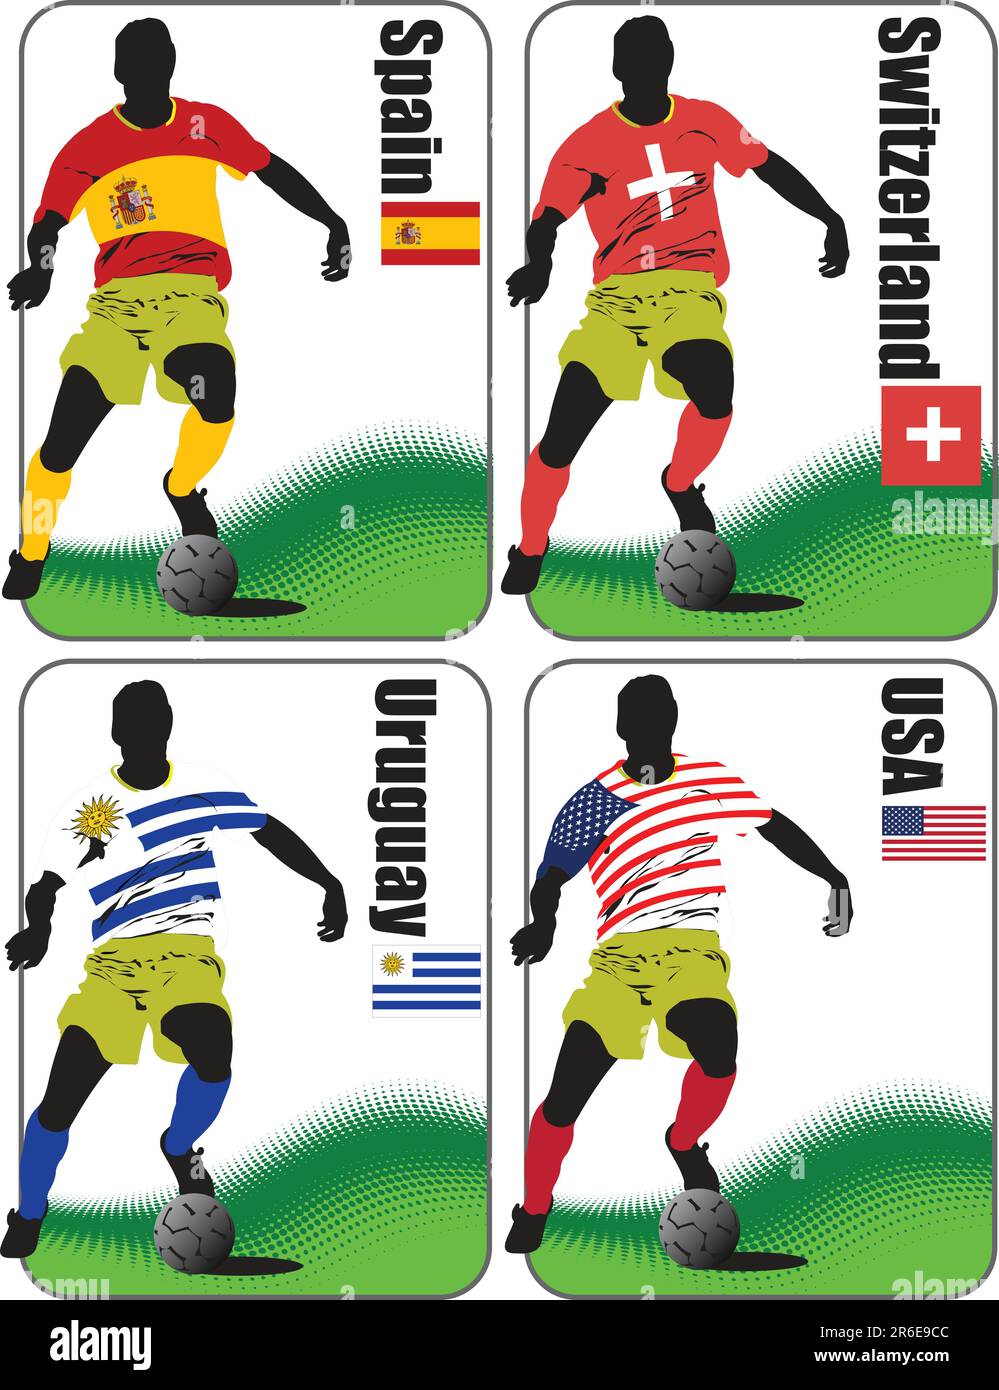 Finals of the World Soccer Cup 2010. 32 teams in T-shirts of the national flags. Spain, Switzerland, Uruguay, USA Stock Vector